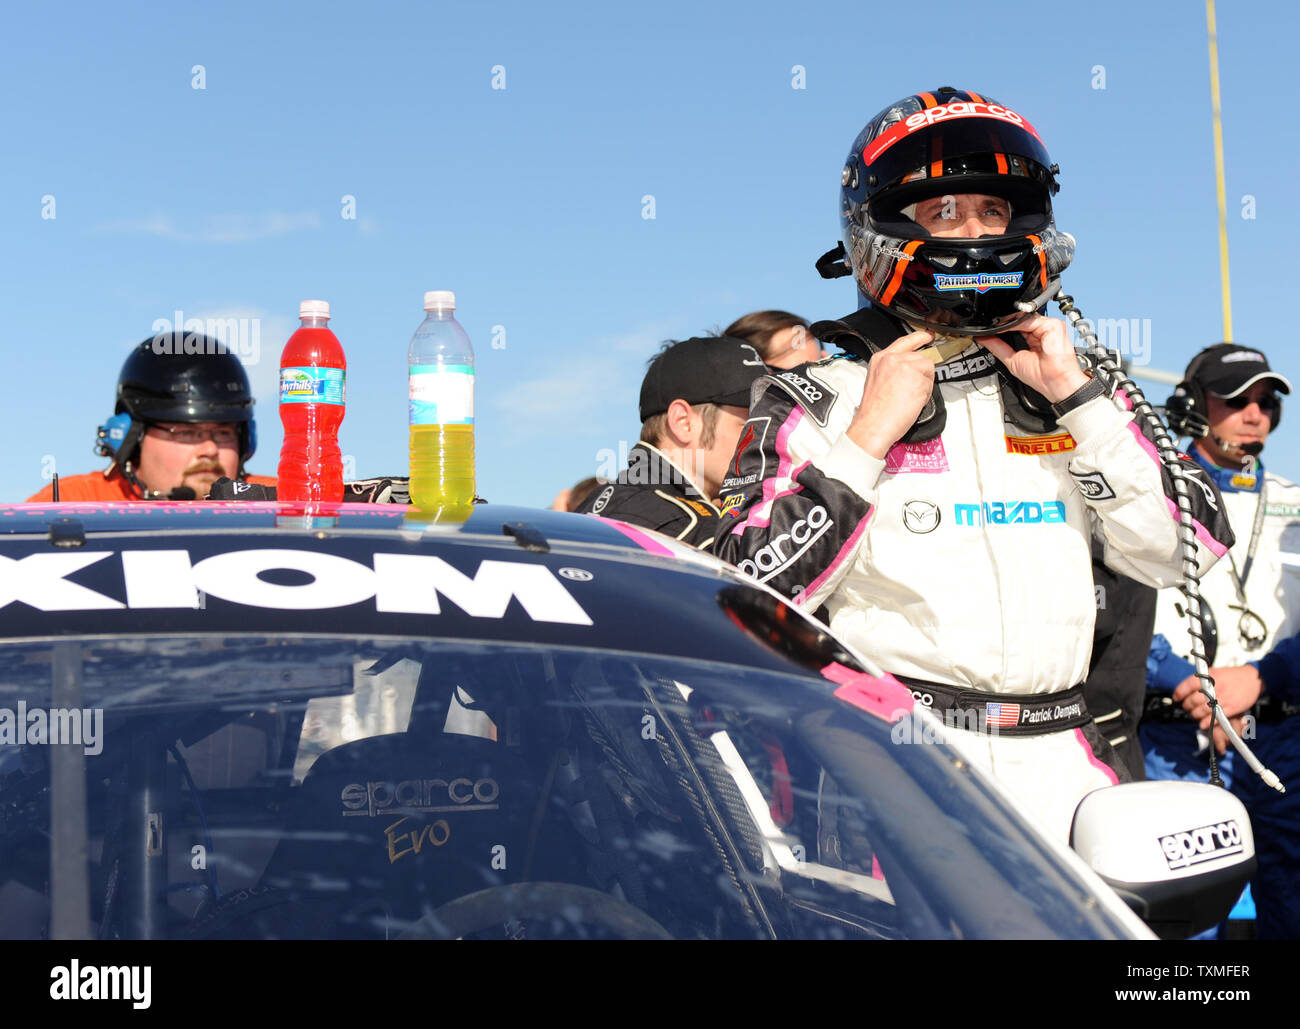 Actor Patrick Dempsey prepares to enter his car prior to the start of the 47th Rolex series race at Daytona International Speedway in Daytona Beach, Florida on January 24, 2009. (UPI Photo/Michael Bush) Stock Photo